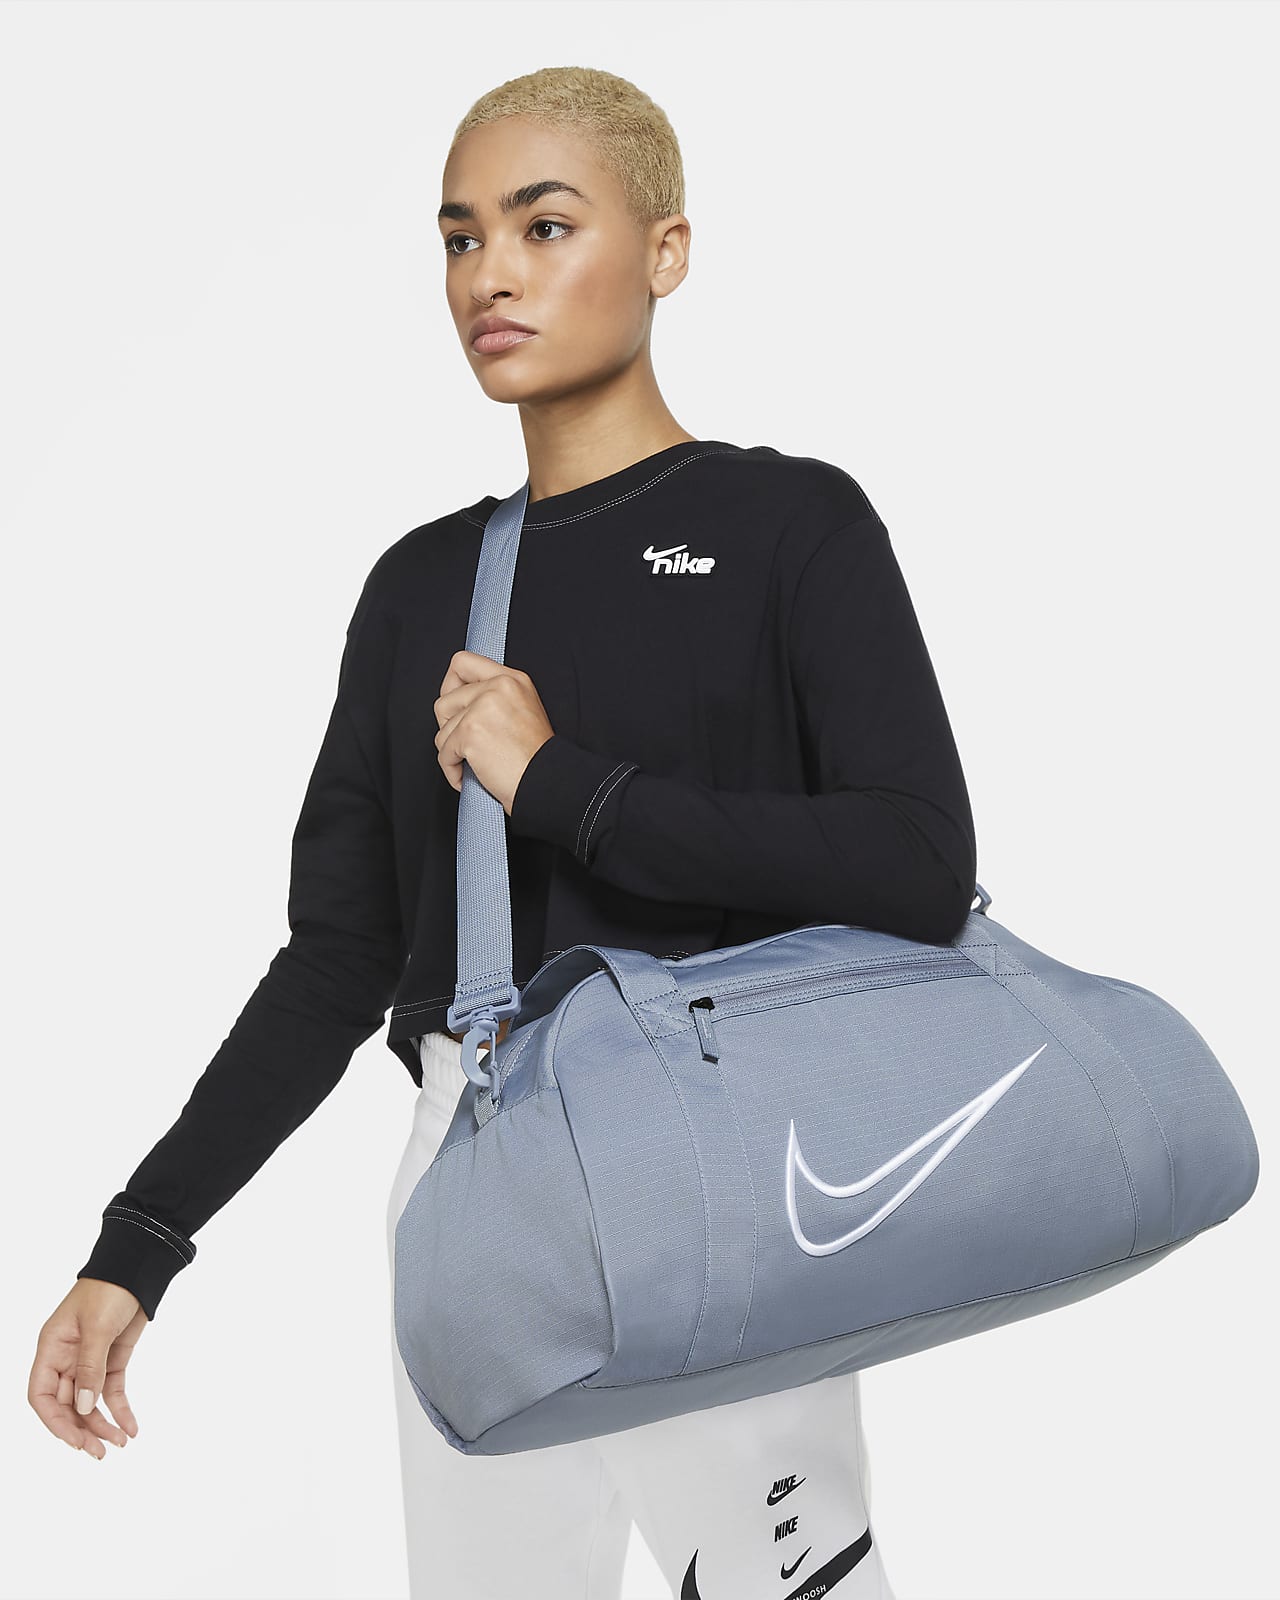 the wind is strong Tell exposition Nike Gym Club Women's Training Duffel Bag (24L). Nike CA